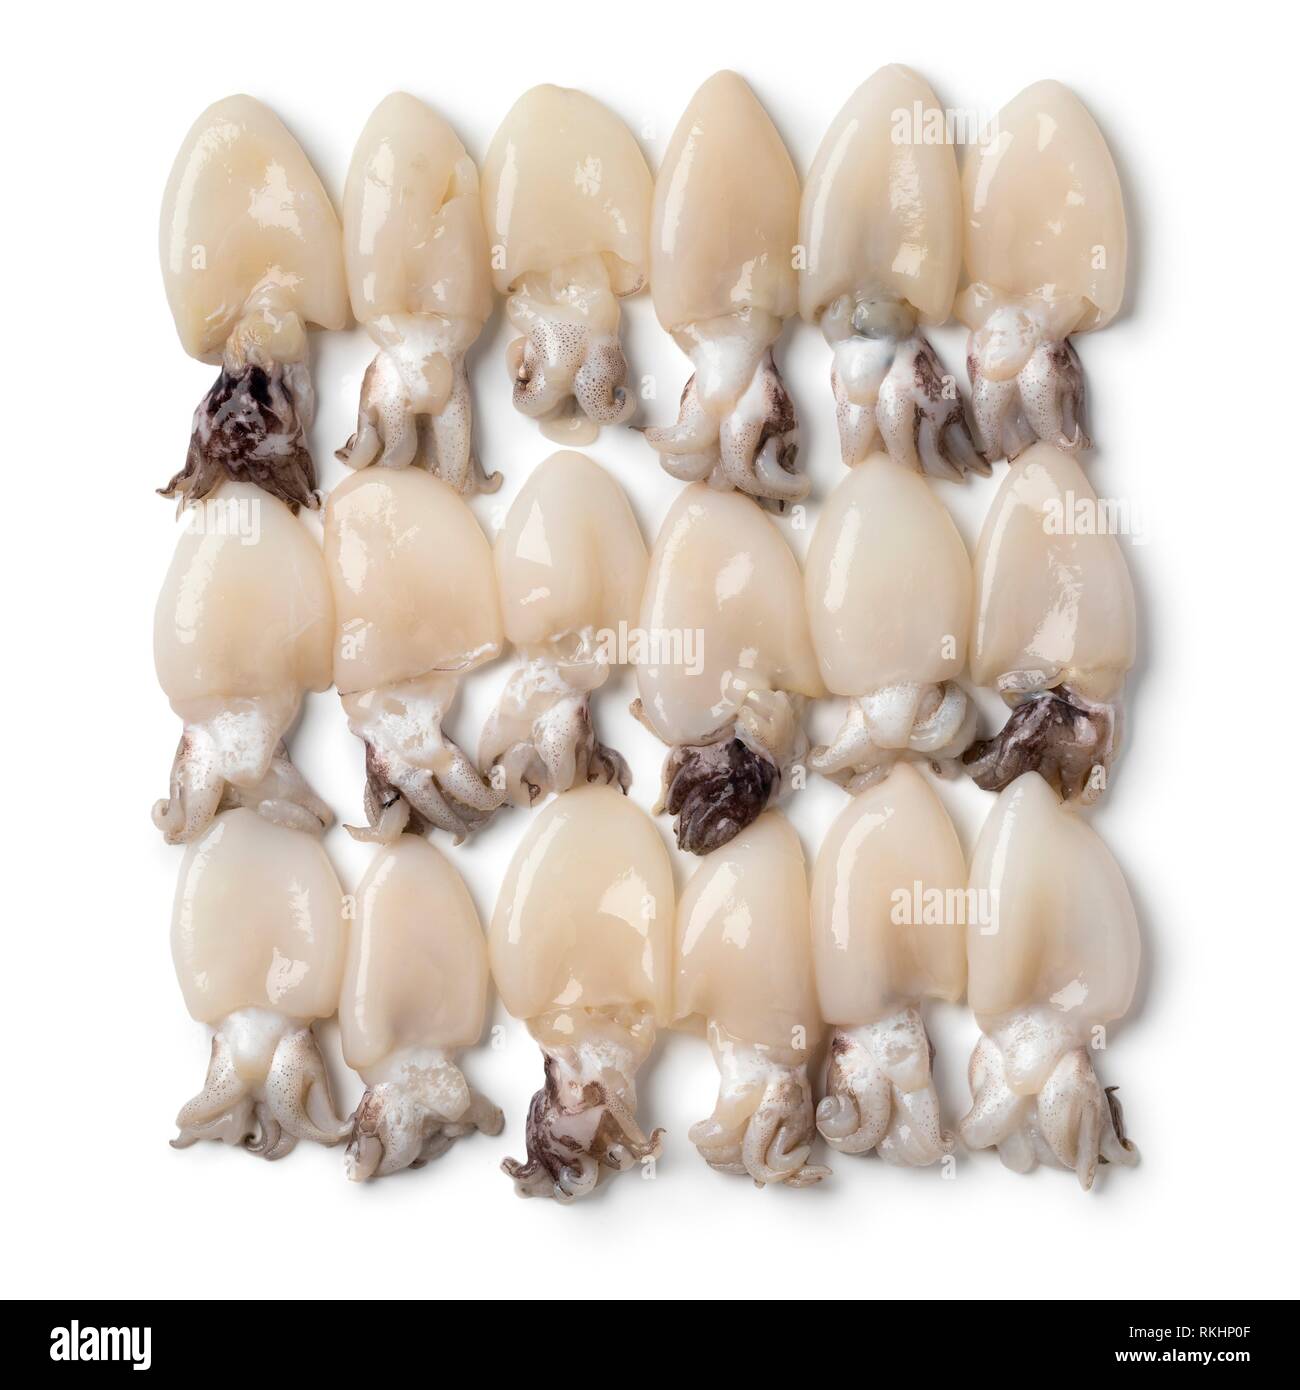 Fresh raw baby squid in rows on white background full frame. Stock Photo